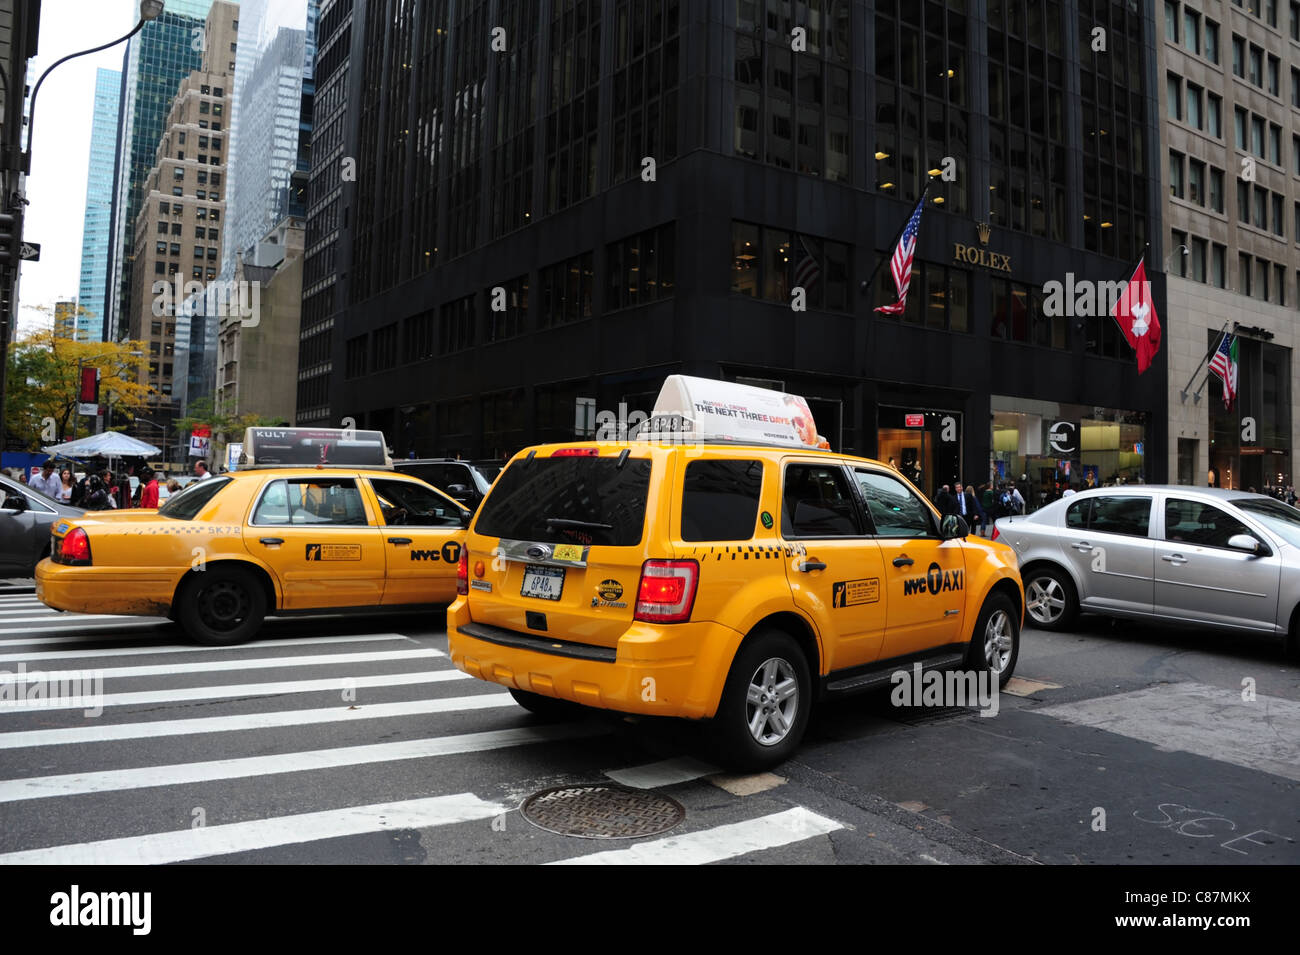 Road jam crossroads 5th Avenue yellow taxis meeting East 53rd Street cars, front Rolex Building, Midtown Manhattan, New York Stock Photo